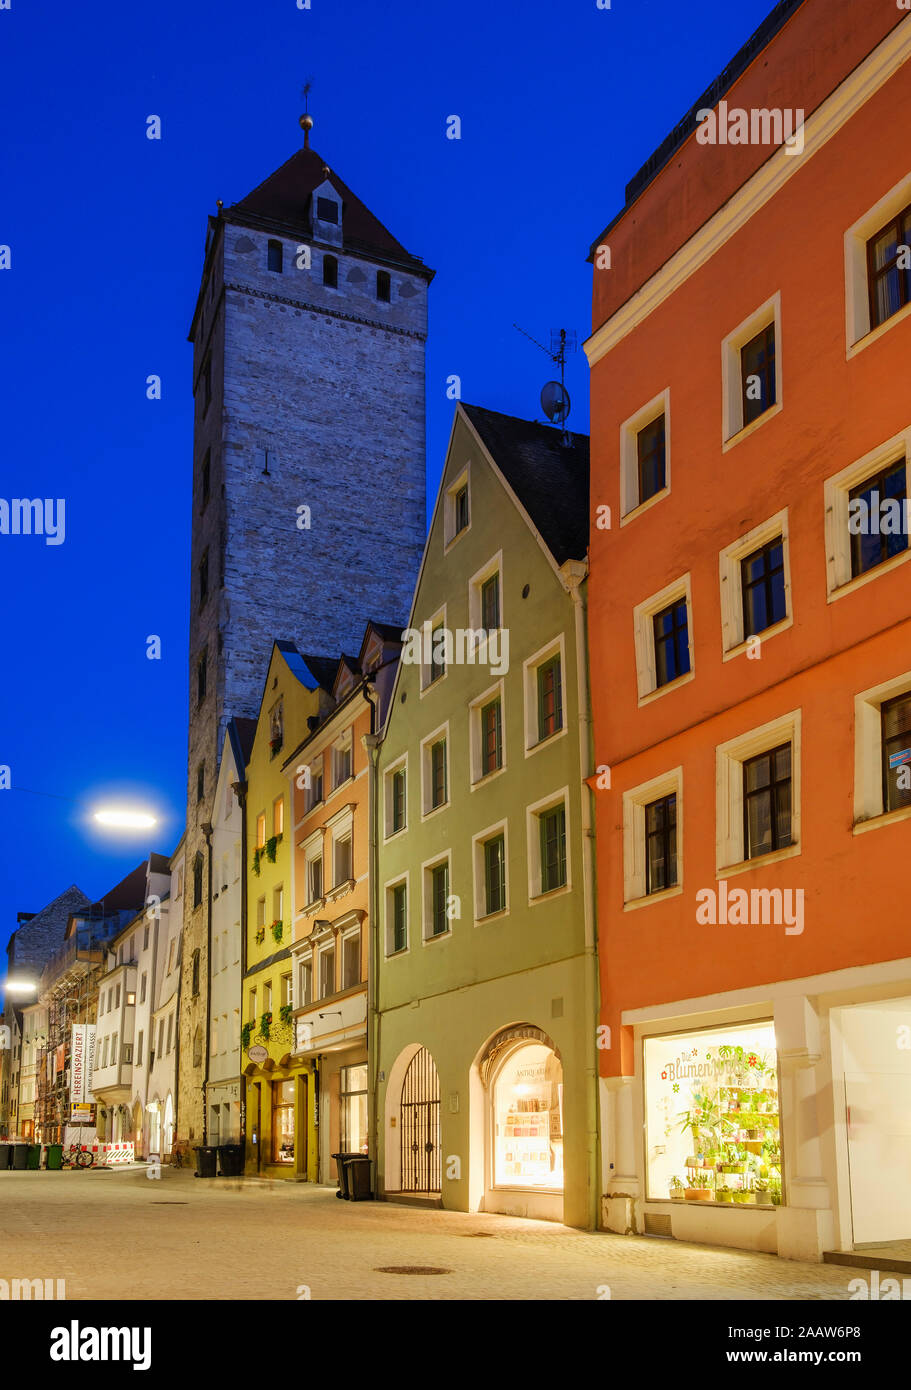 Golden tower and houses at night Wahlenstrasse, Regensburg, Upper Palatinate, Bavaria, Germany Stock Photo